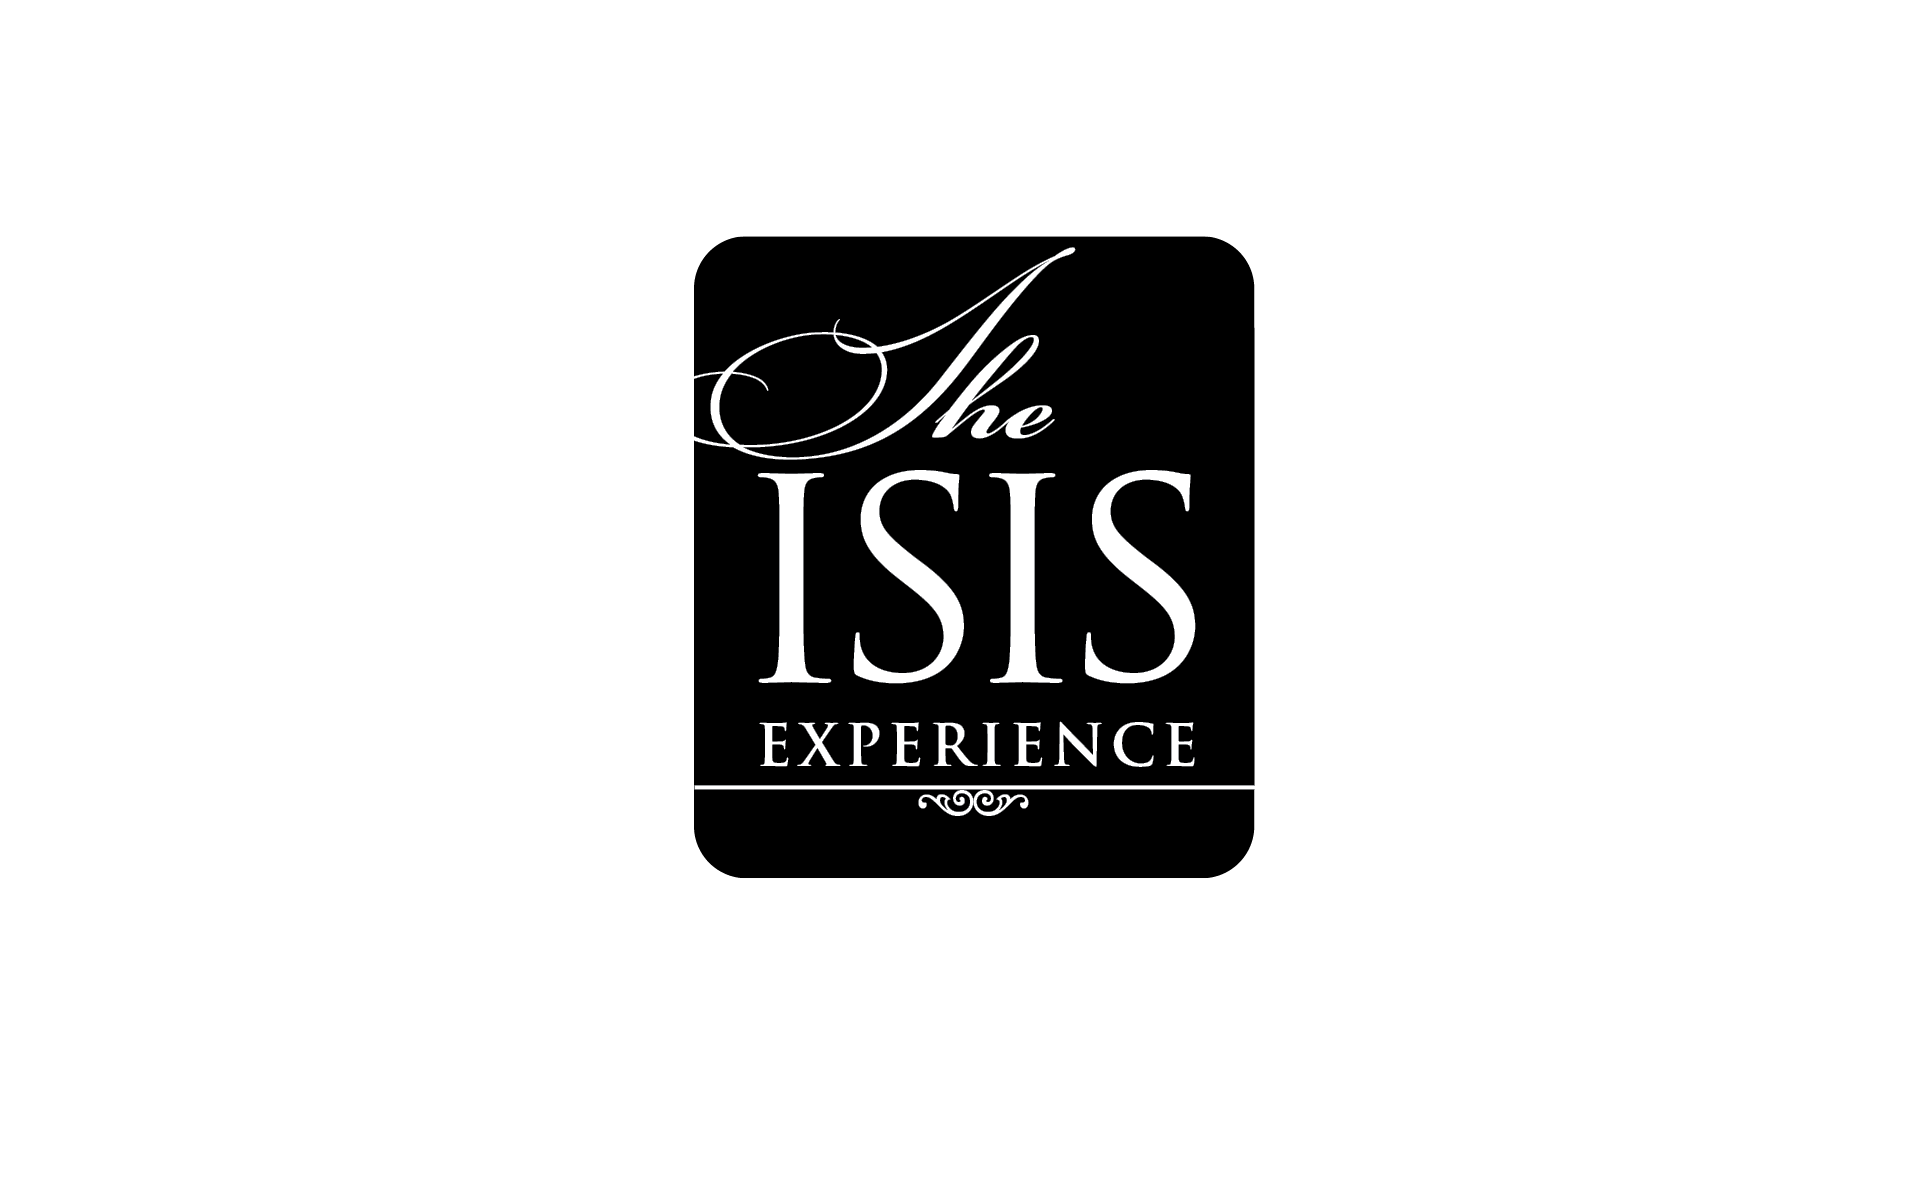 THE ISIS EXPERIENCE LOGO www.isisexperience.com